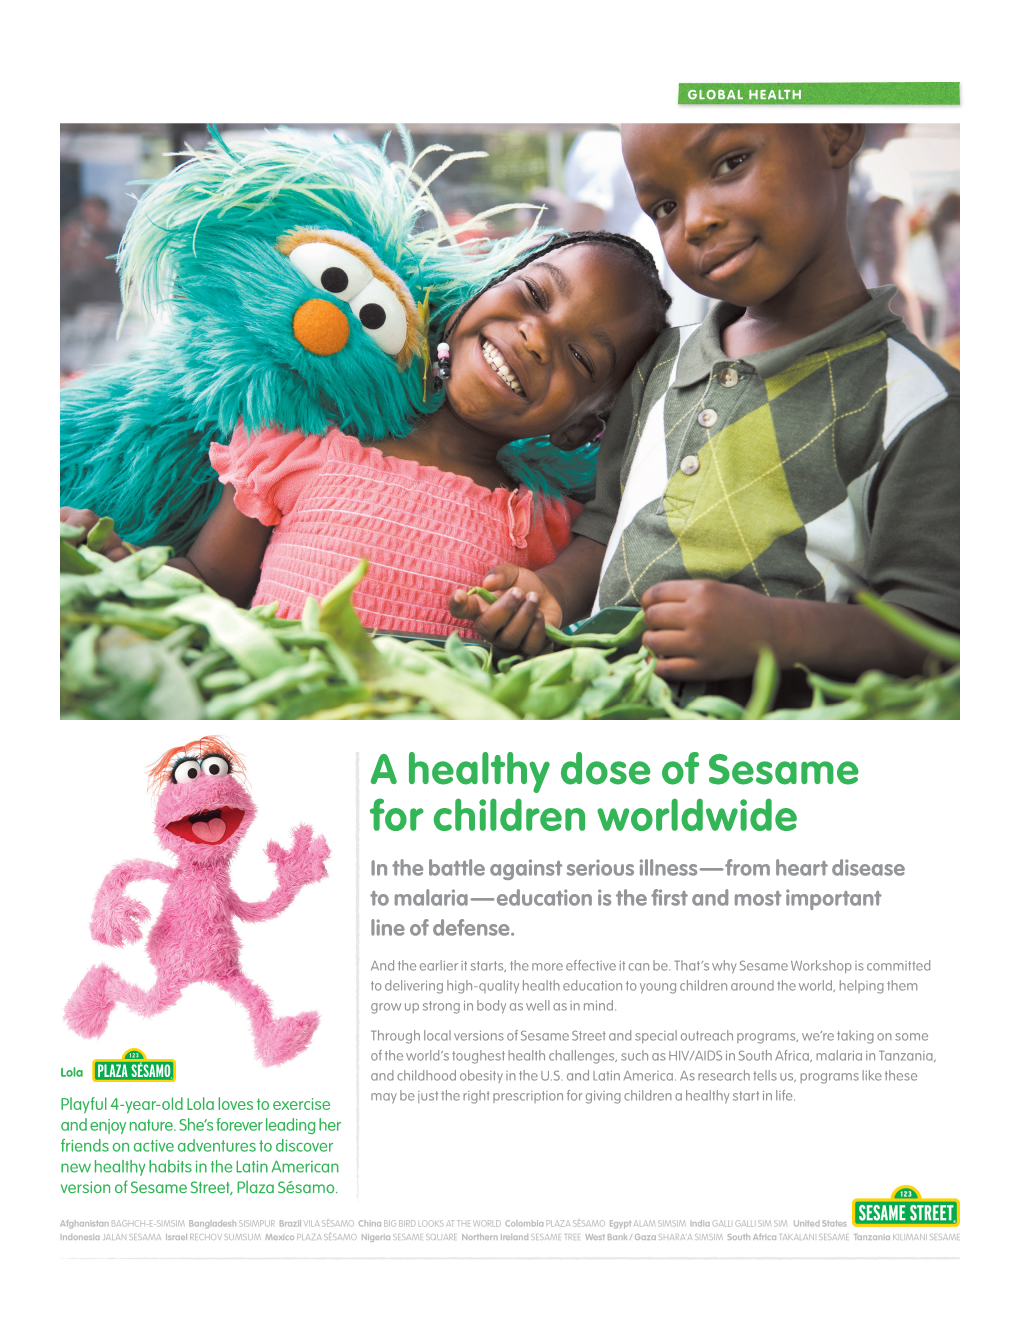 A Healthy Dose of Sesame for Children Worldwide